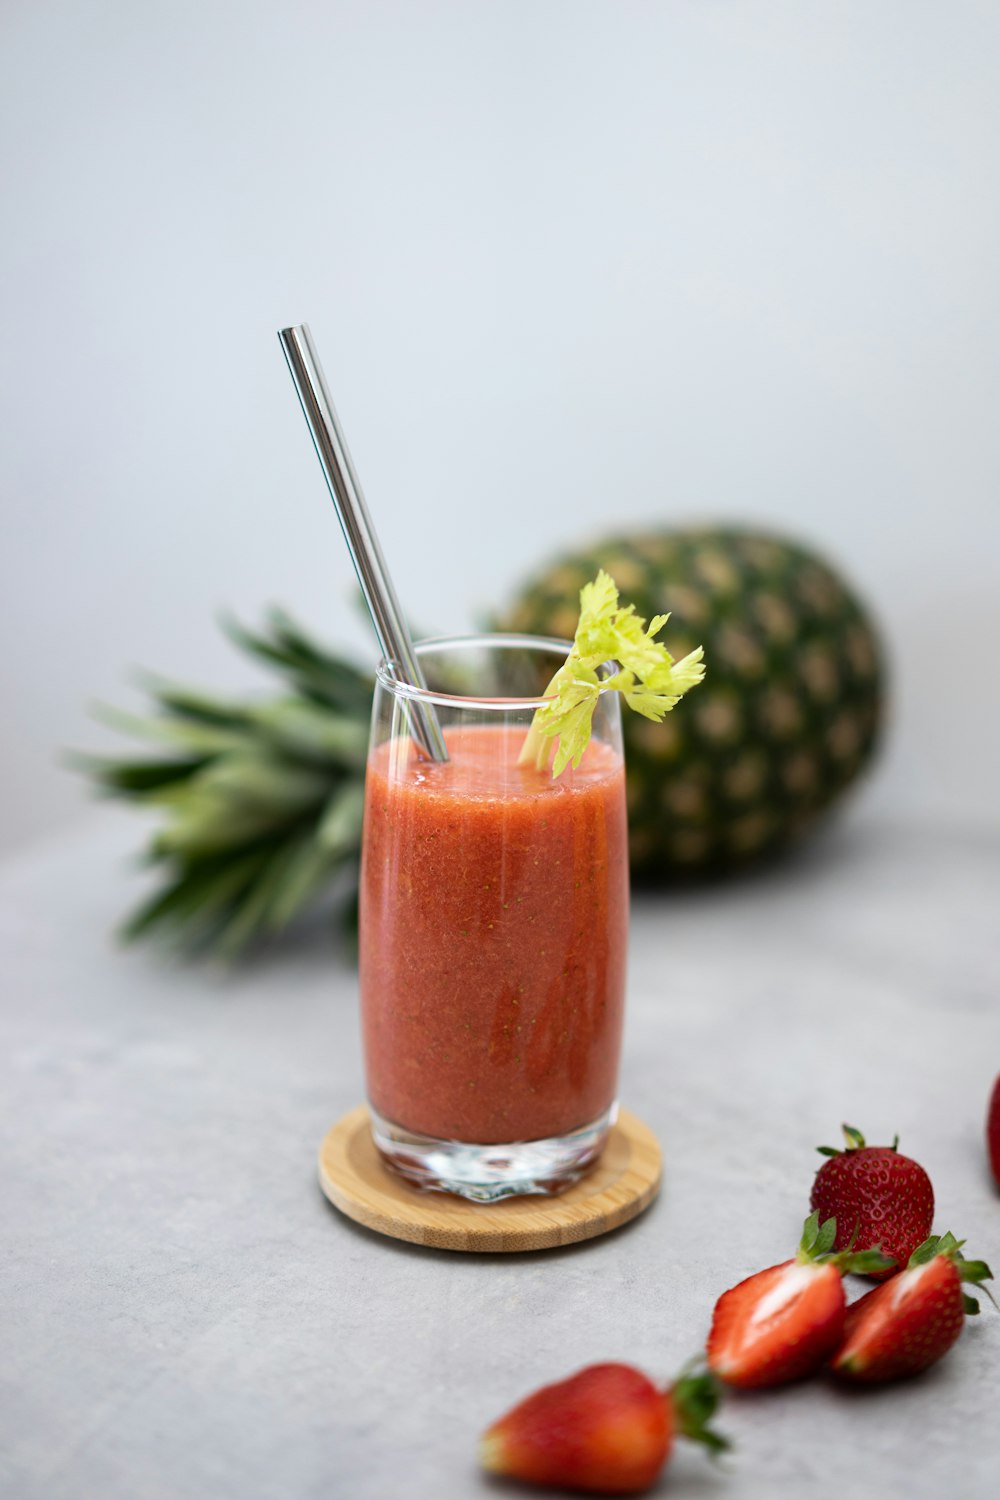 a smoothie in a glass with a straw and garnish